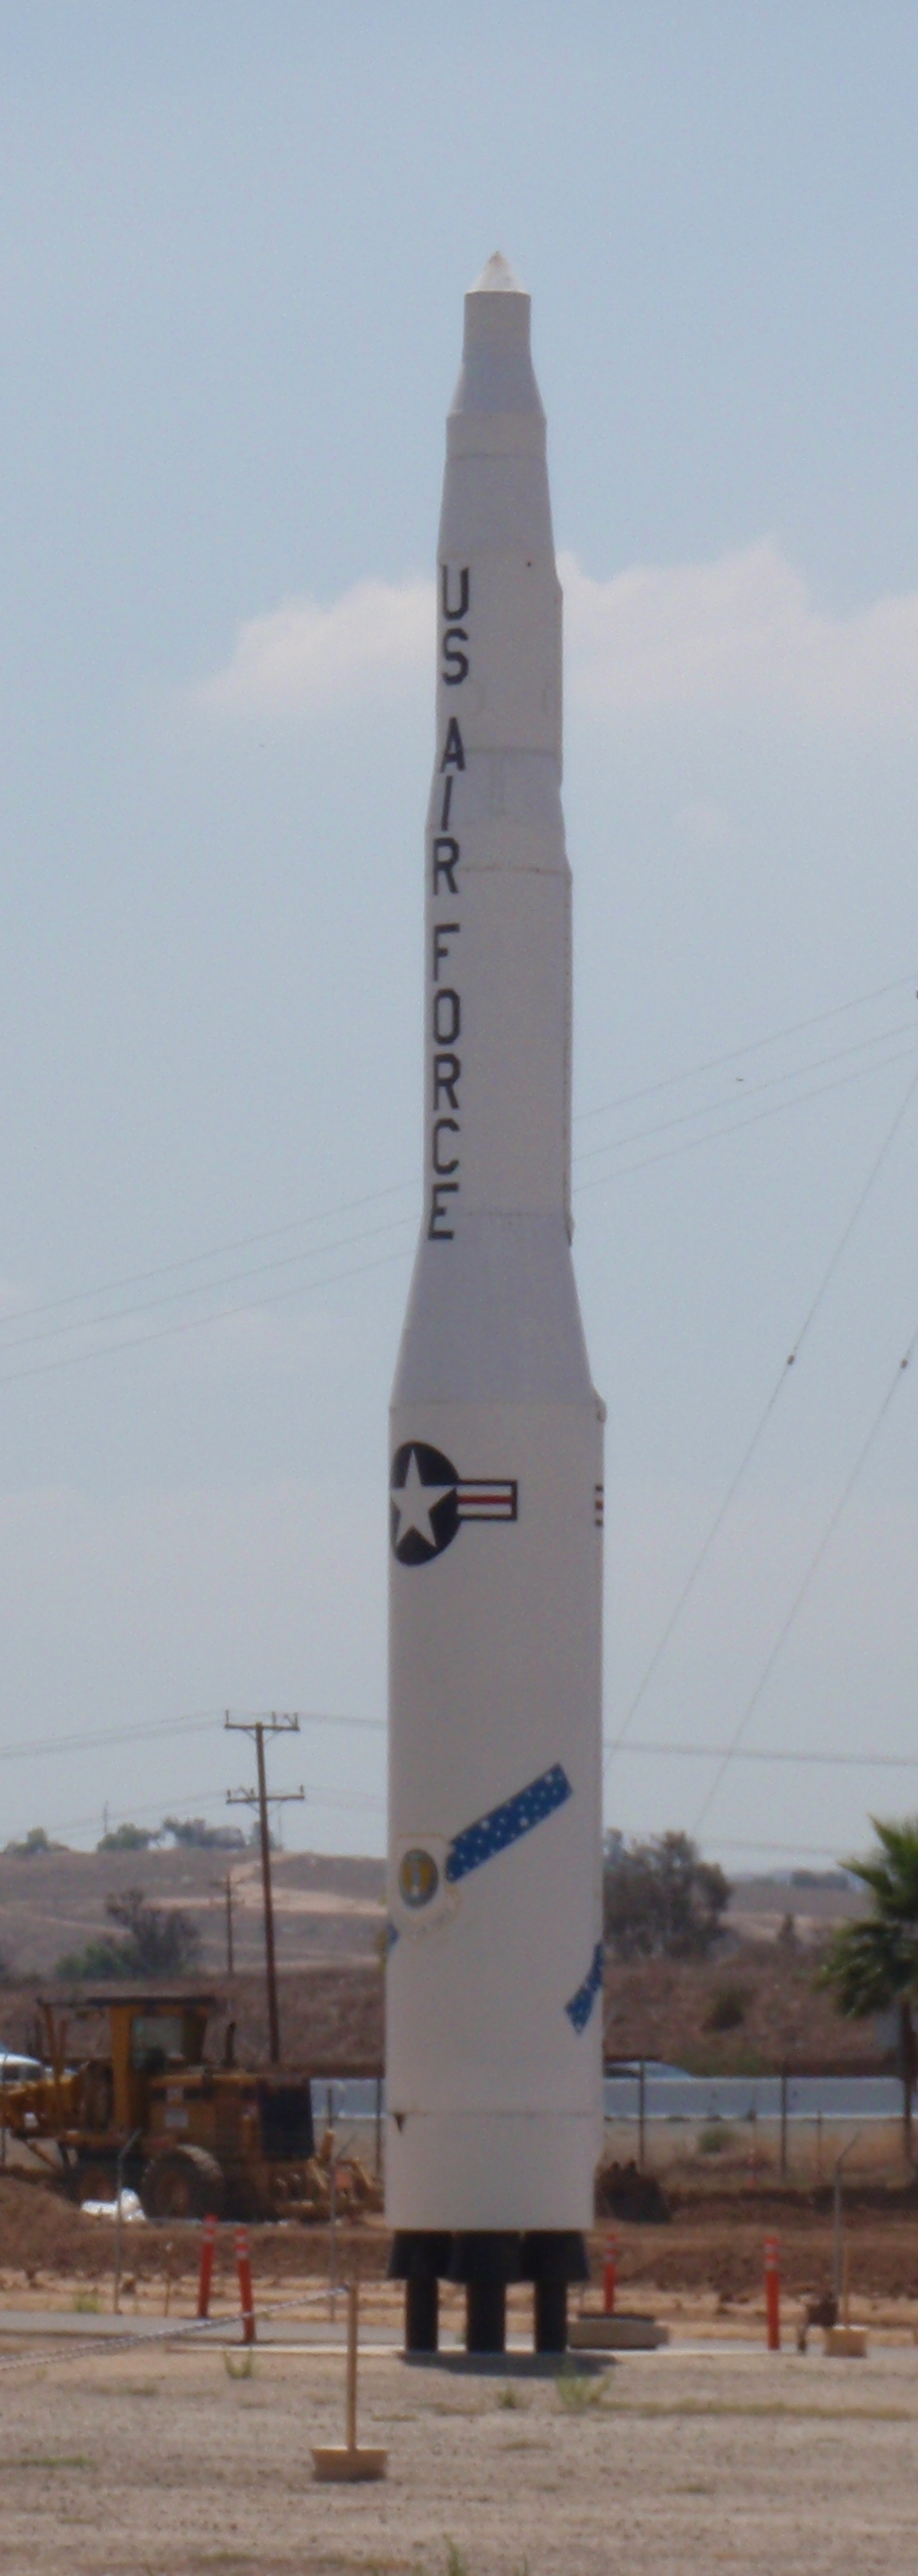 Minuteman II on static display at March Air Base Museum. Photo by James Ulvog.